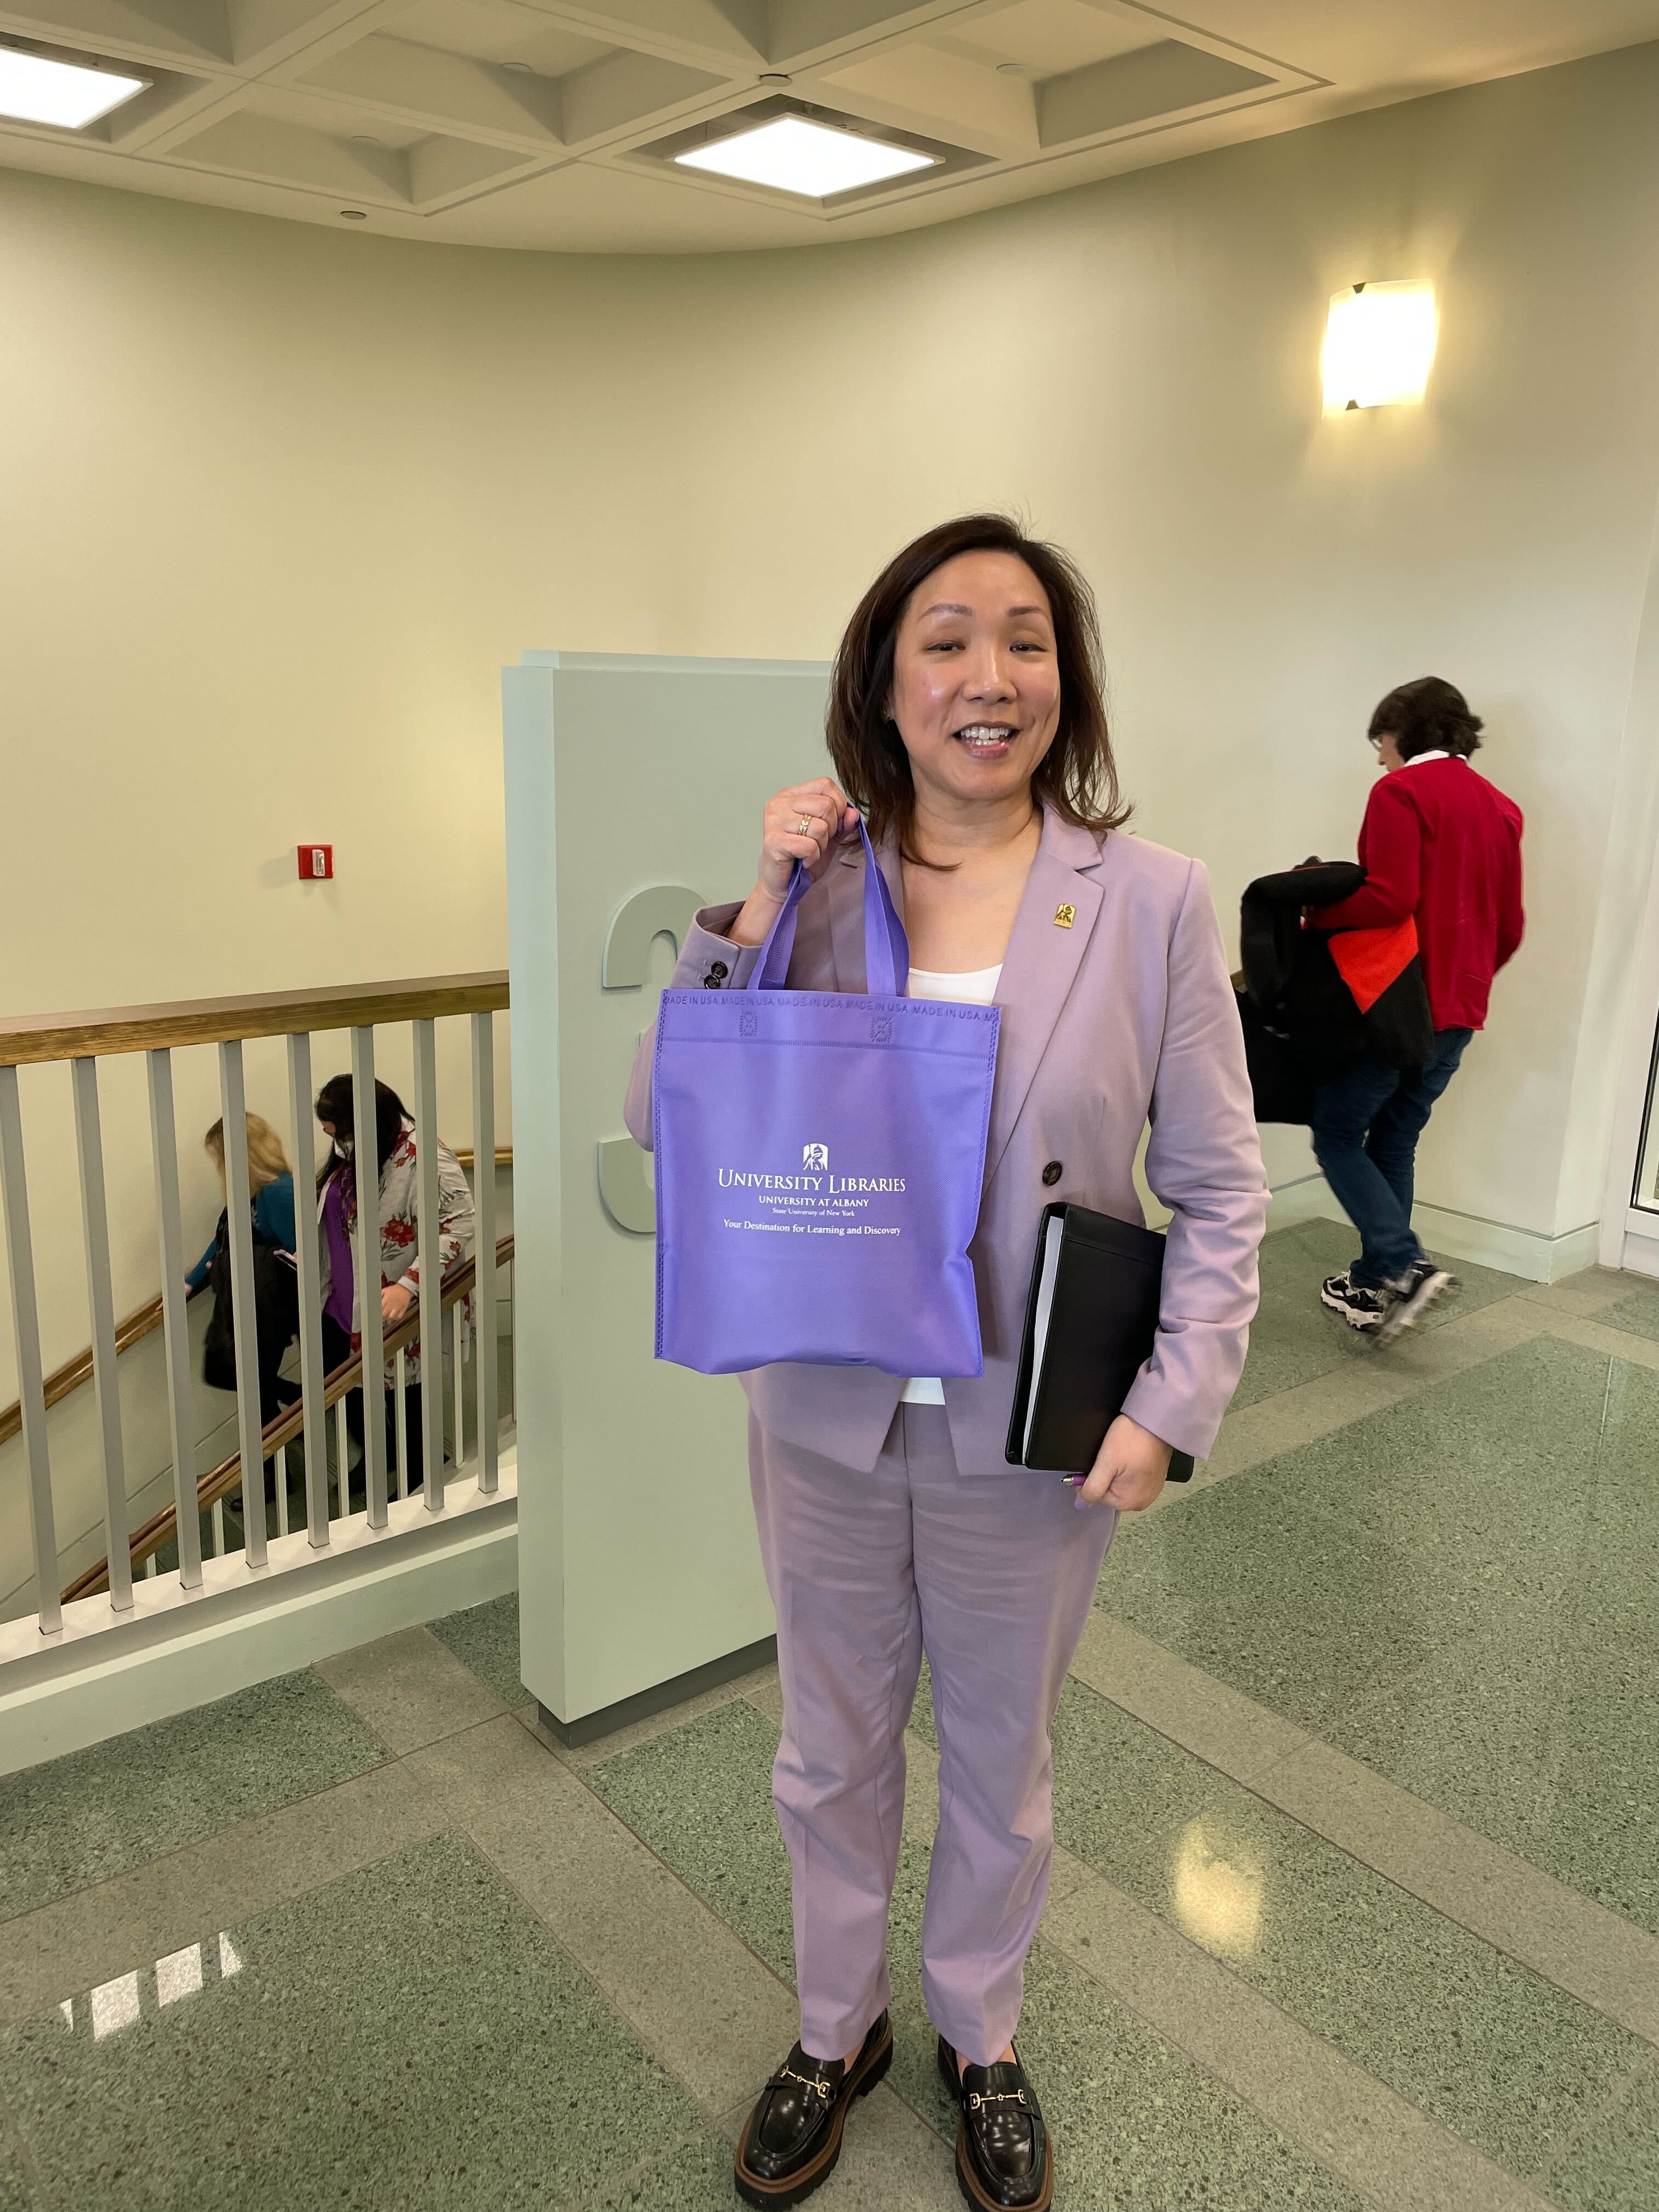 Provost Kim poses with a University Libraries tote bag